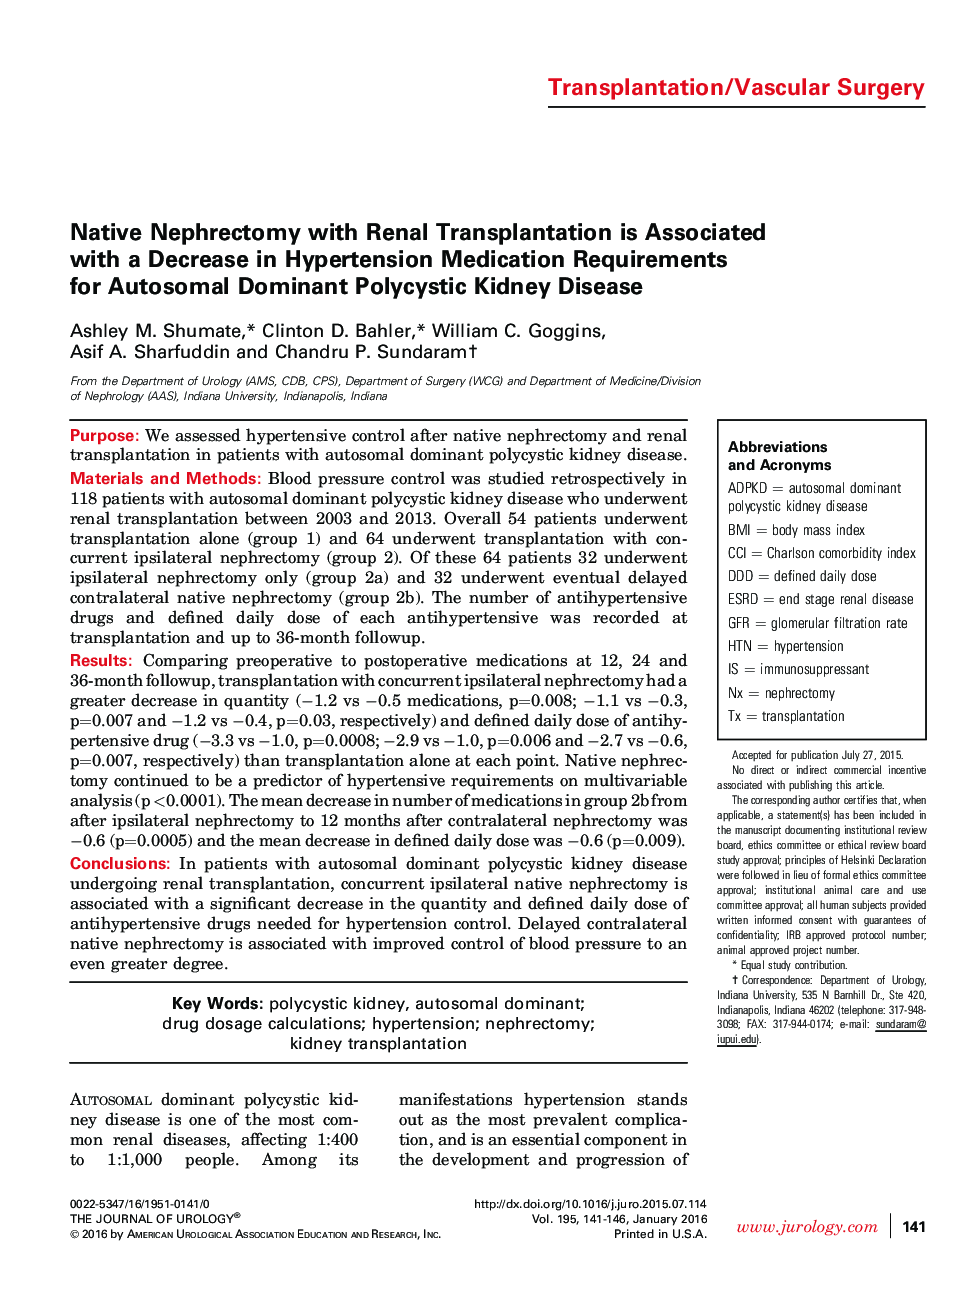 Native Nephrectomy with Renal Transplantation is Associated with a Decrease in Hypertension Medication Requirements for Autosomal Dominant Polycystic Kidney Disease 